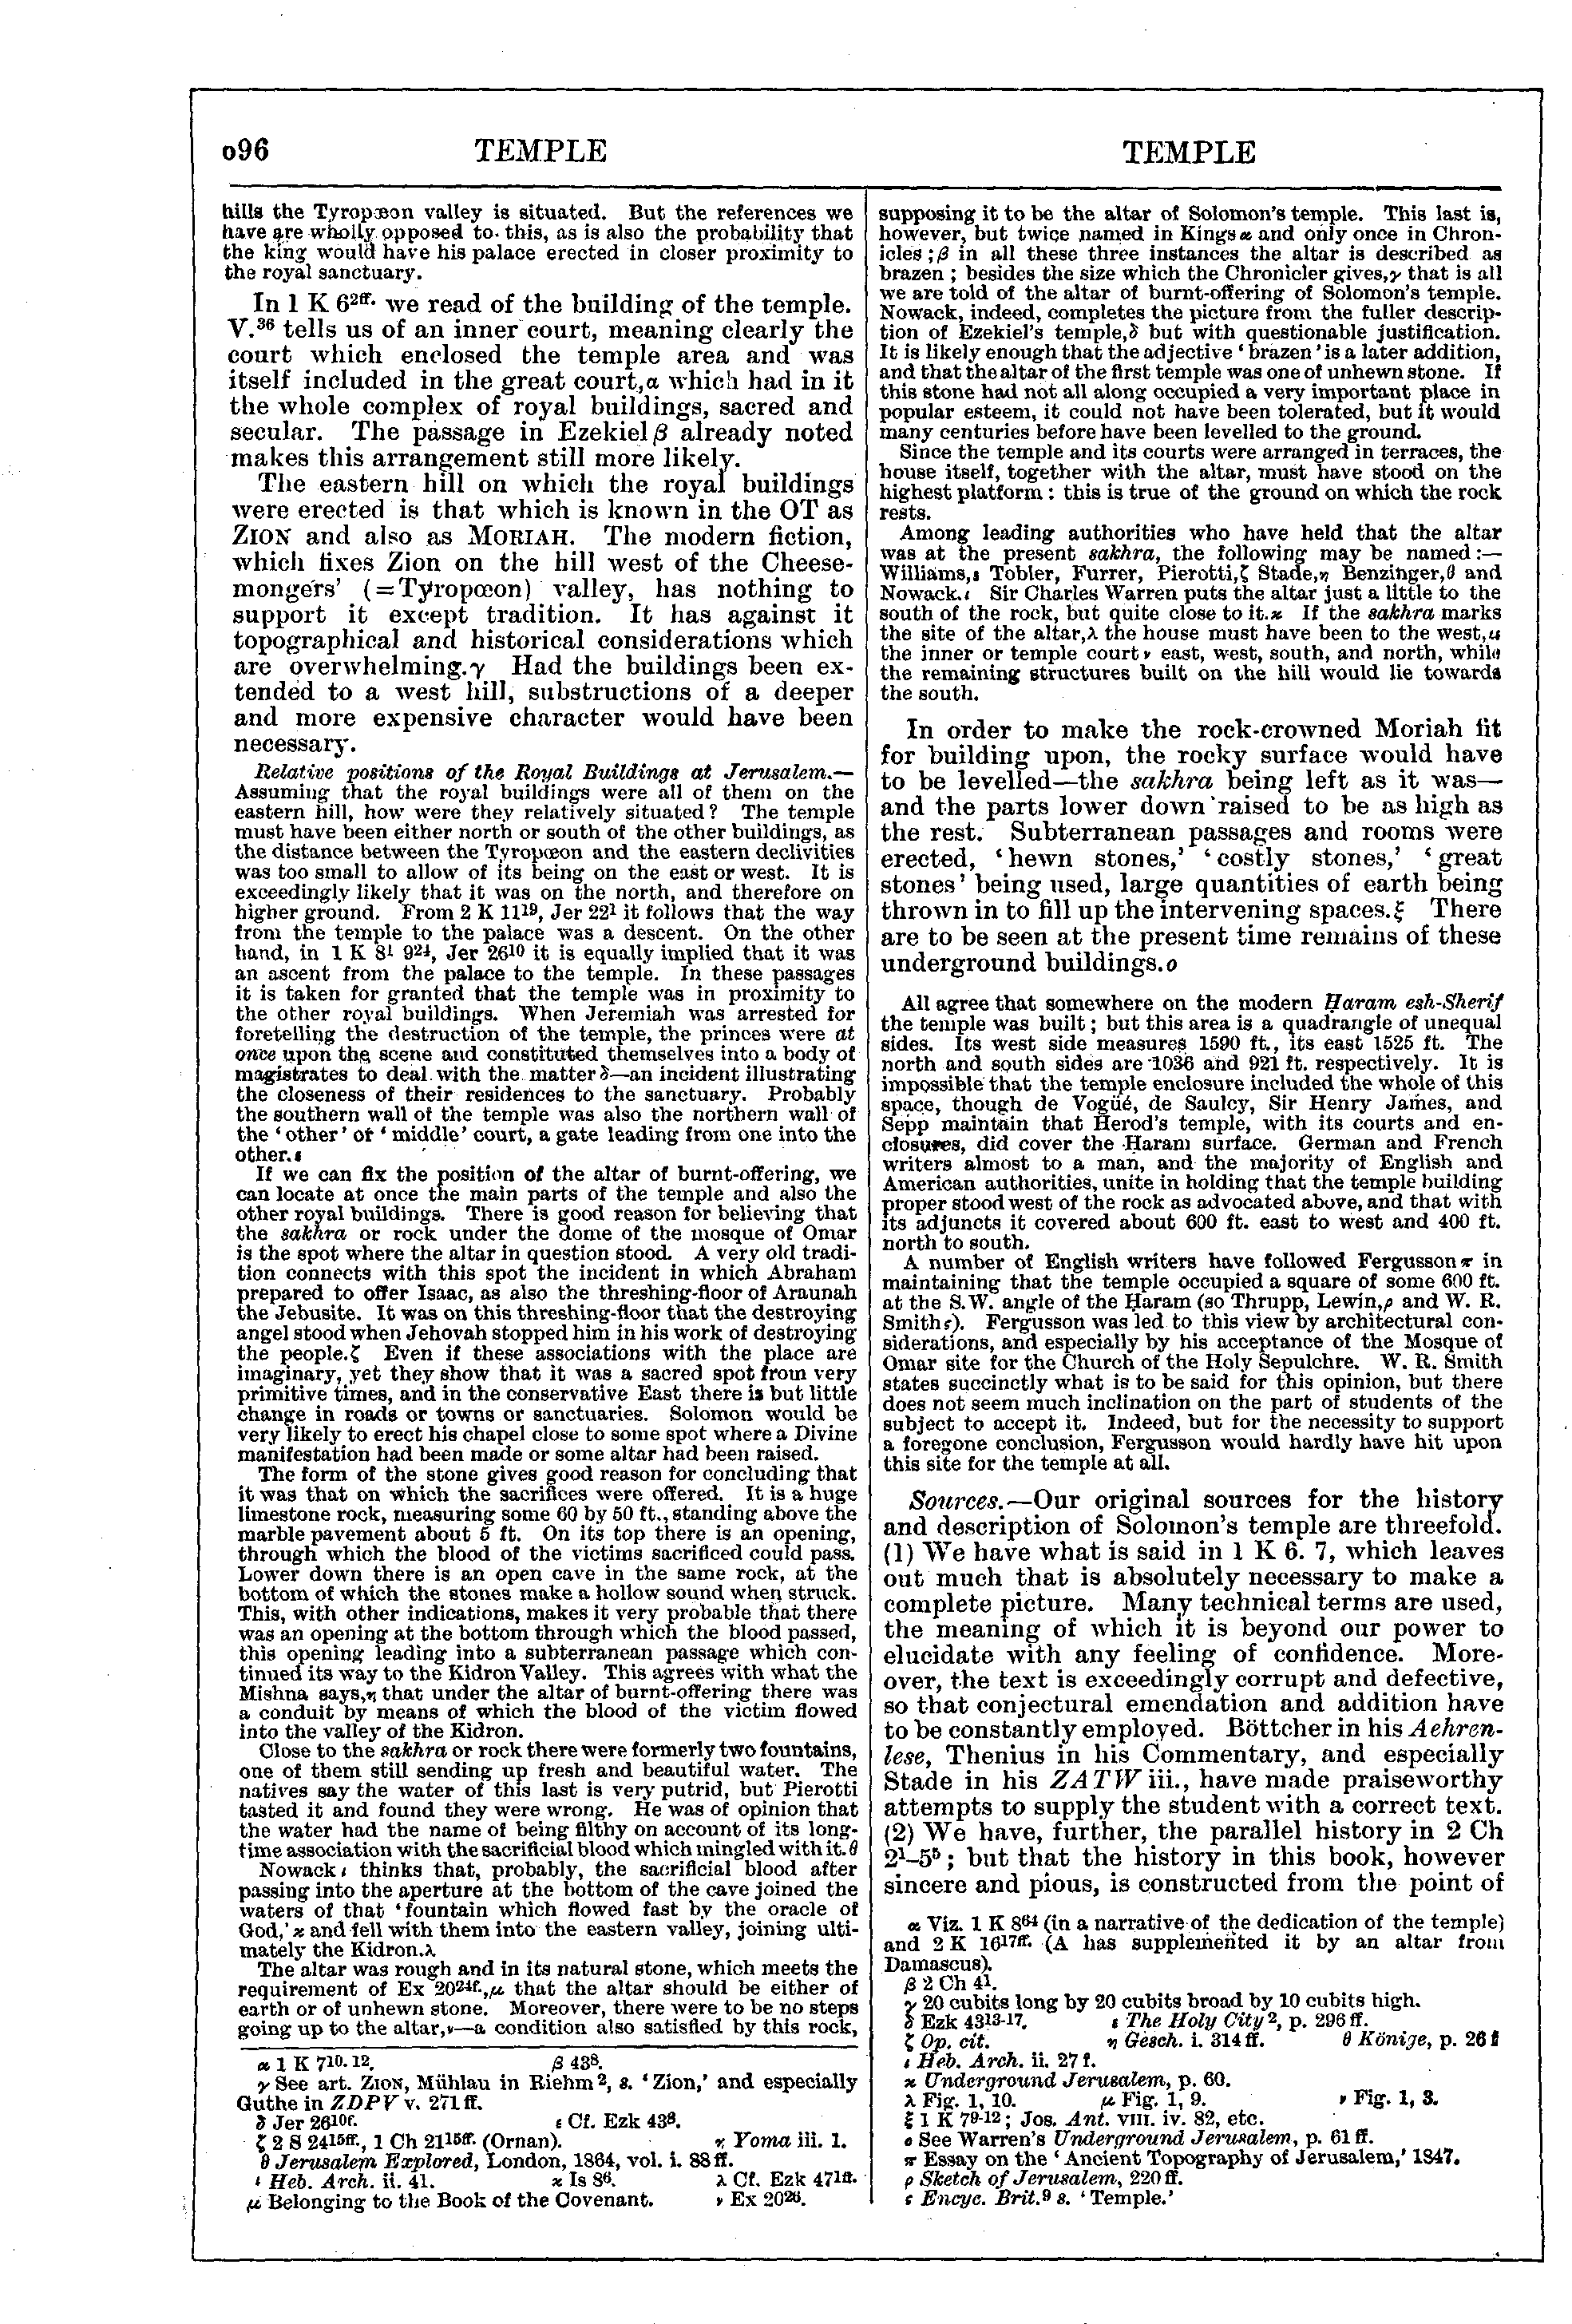 Image of page 696